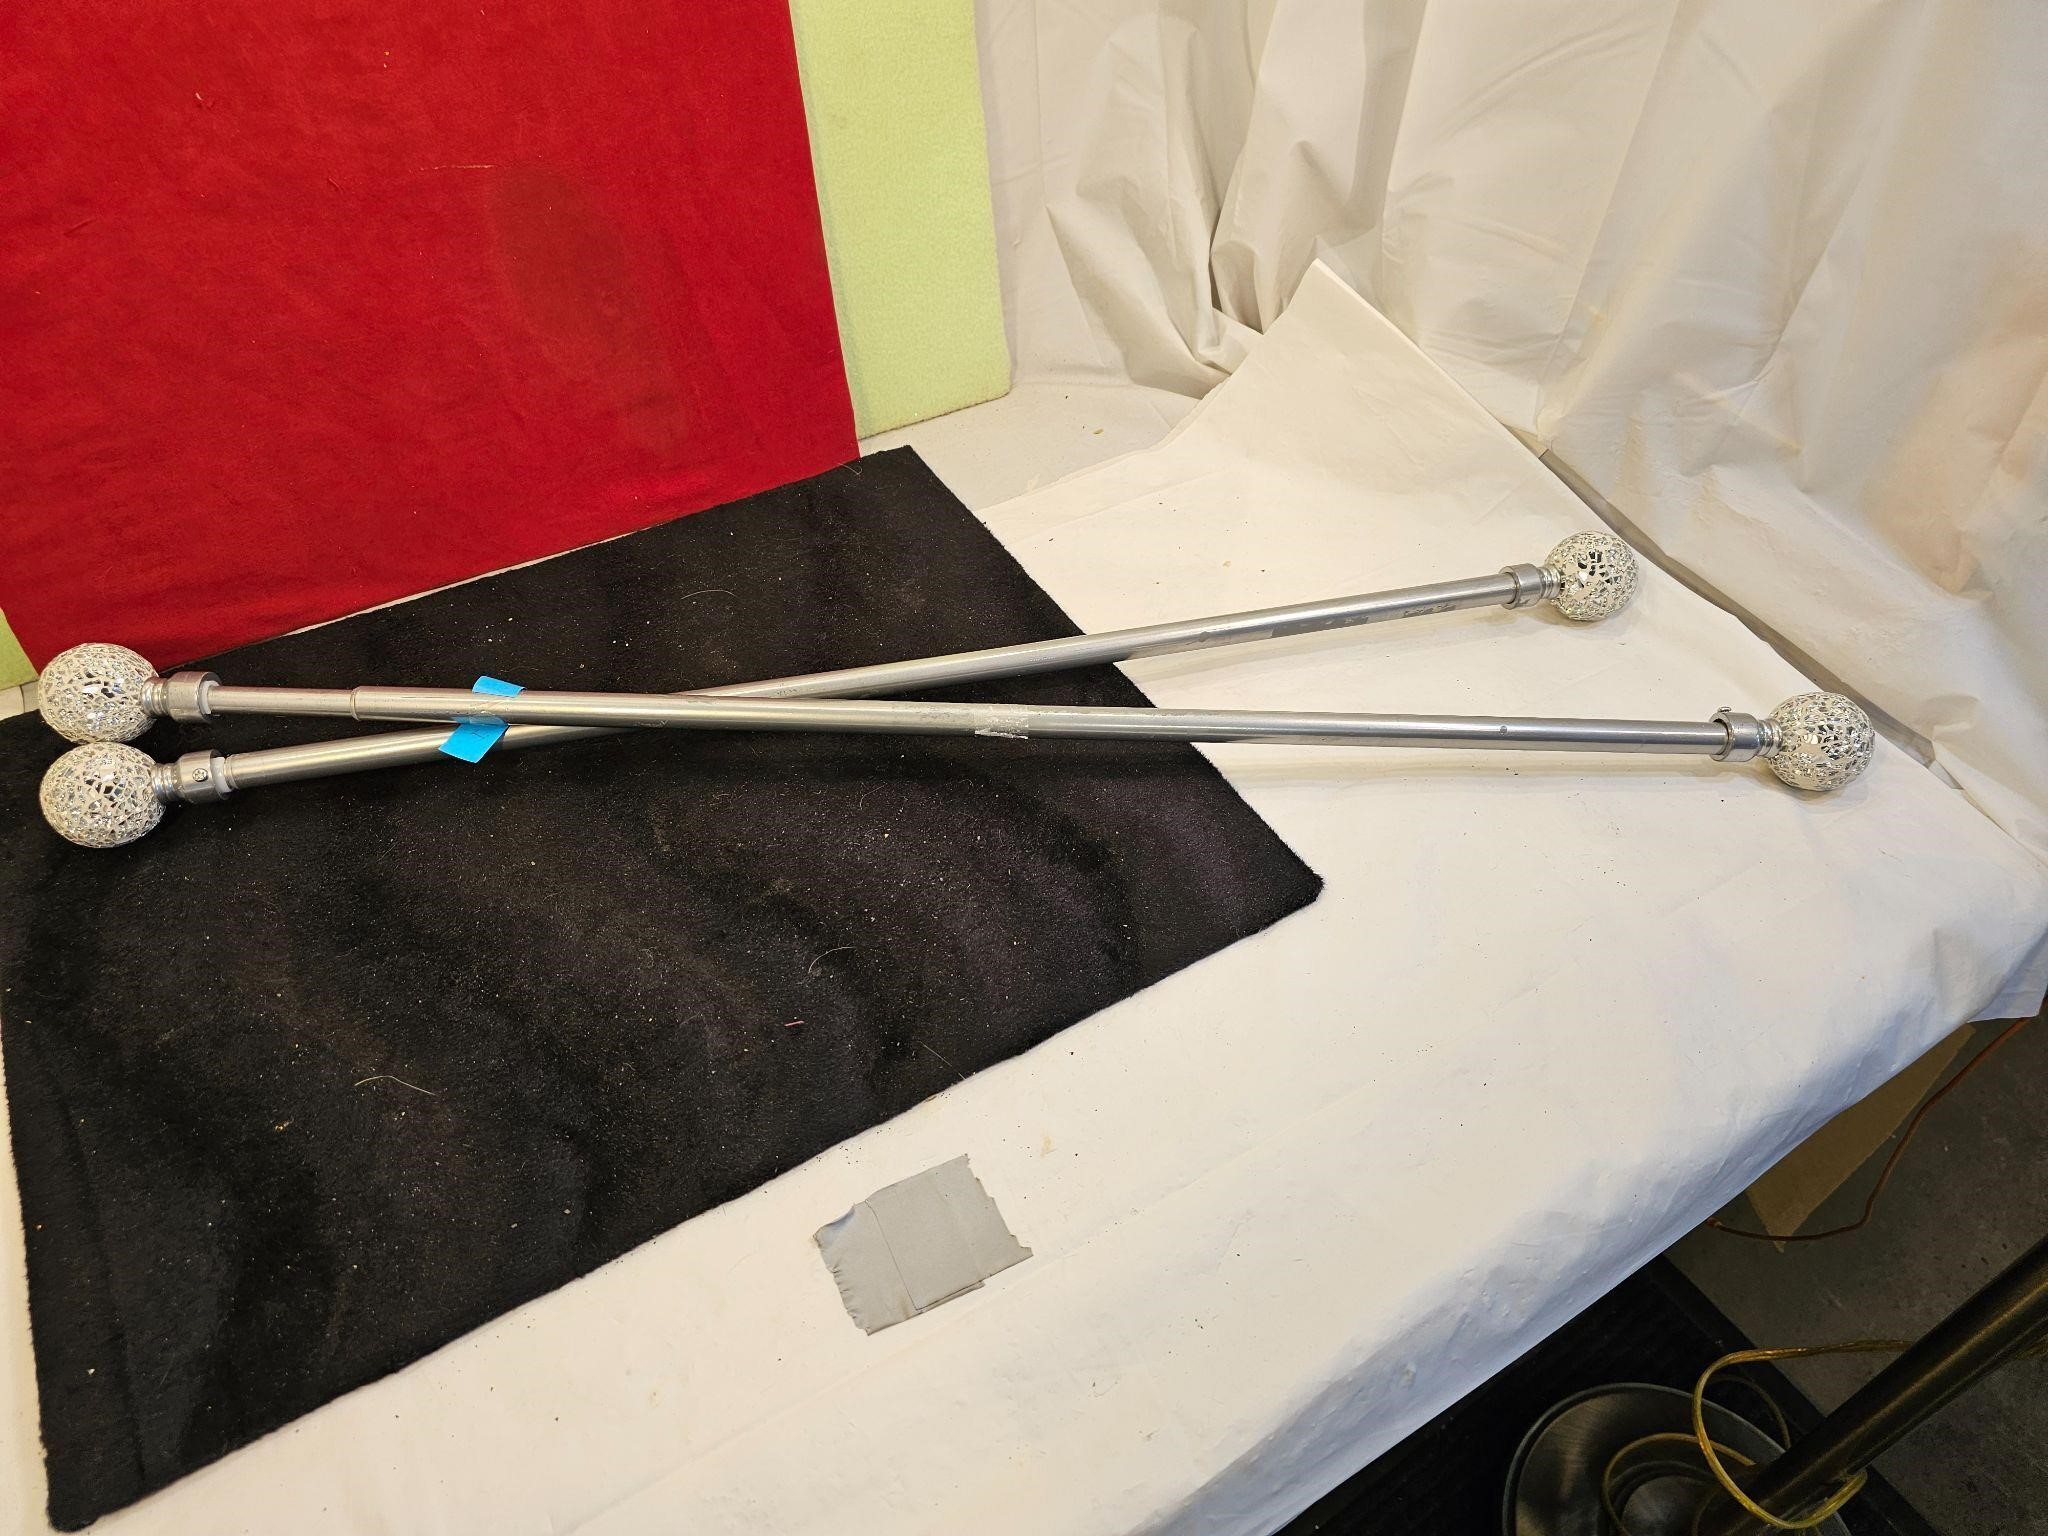 CURTAIN RODS WTH DECORATIVE ENDS